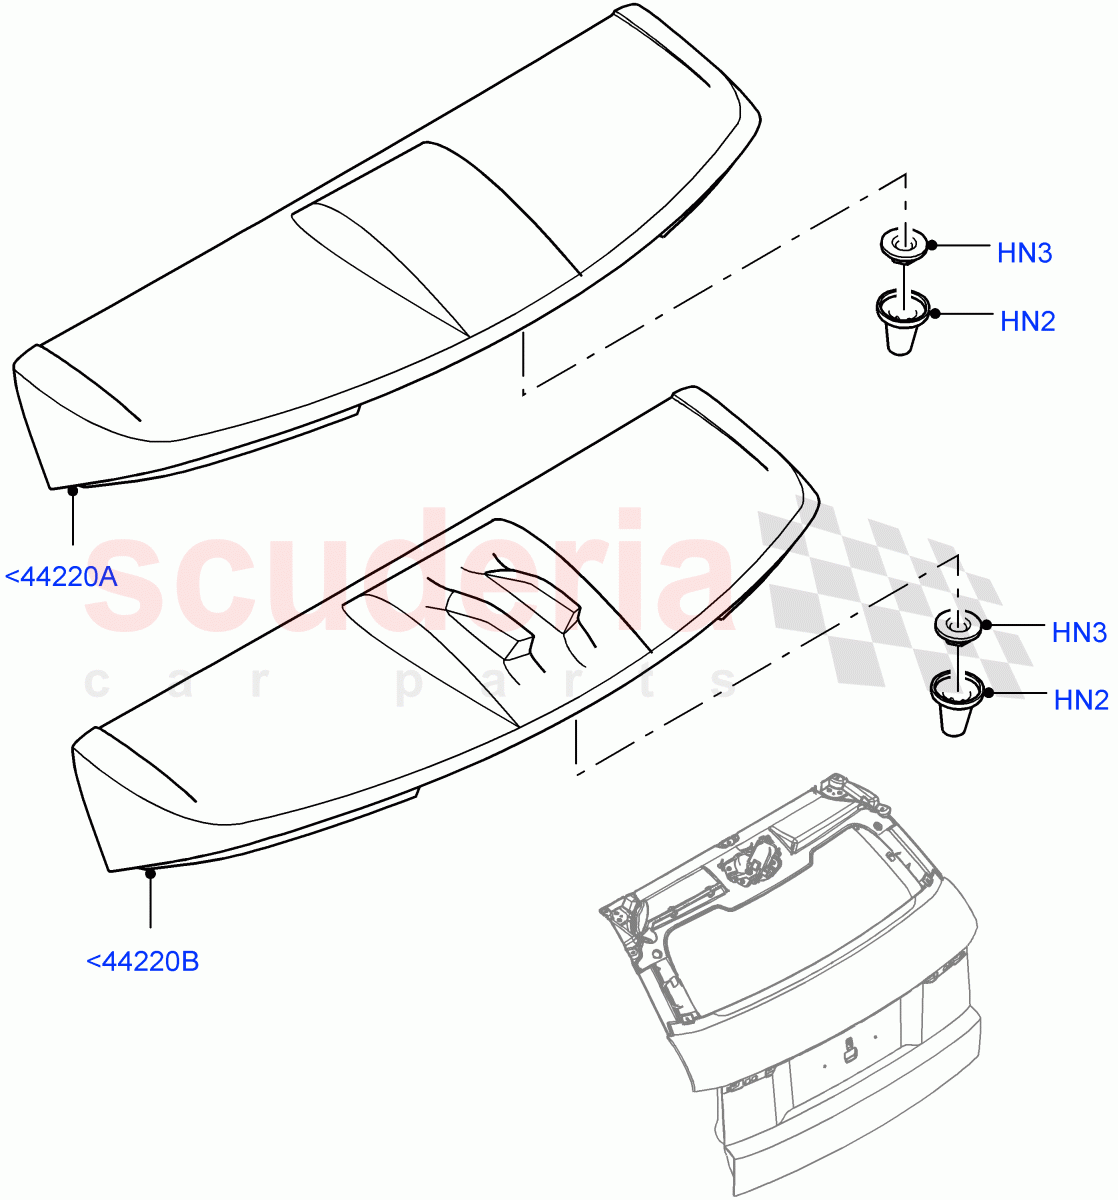 Spoiler And Related Parts(Itatiaia (Brazil))((V)FROMGT000001) of Land Rover Land Rover Range Rover Evoque (2012-2018) [2.2 Single Turbo Diesel]